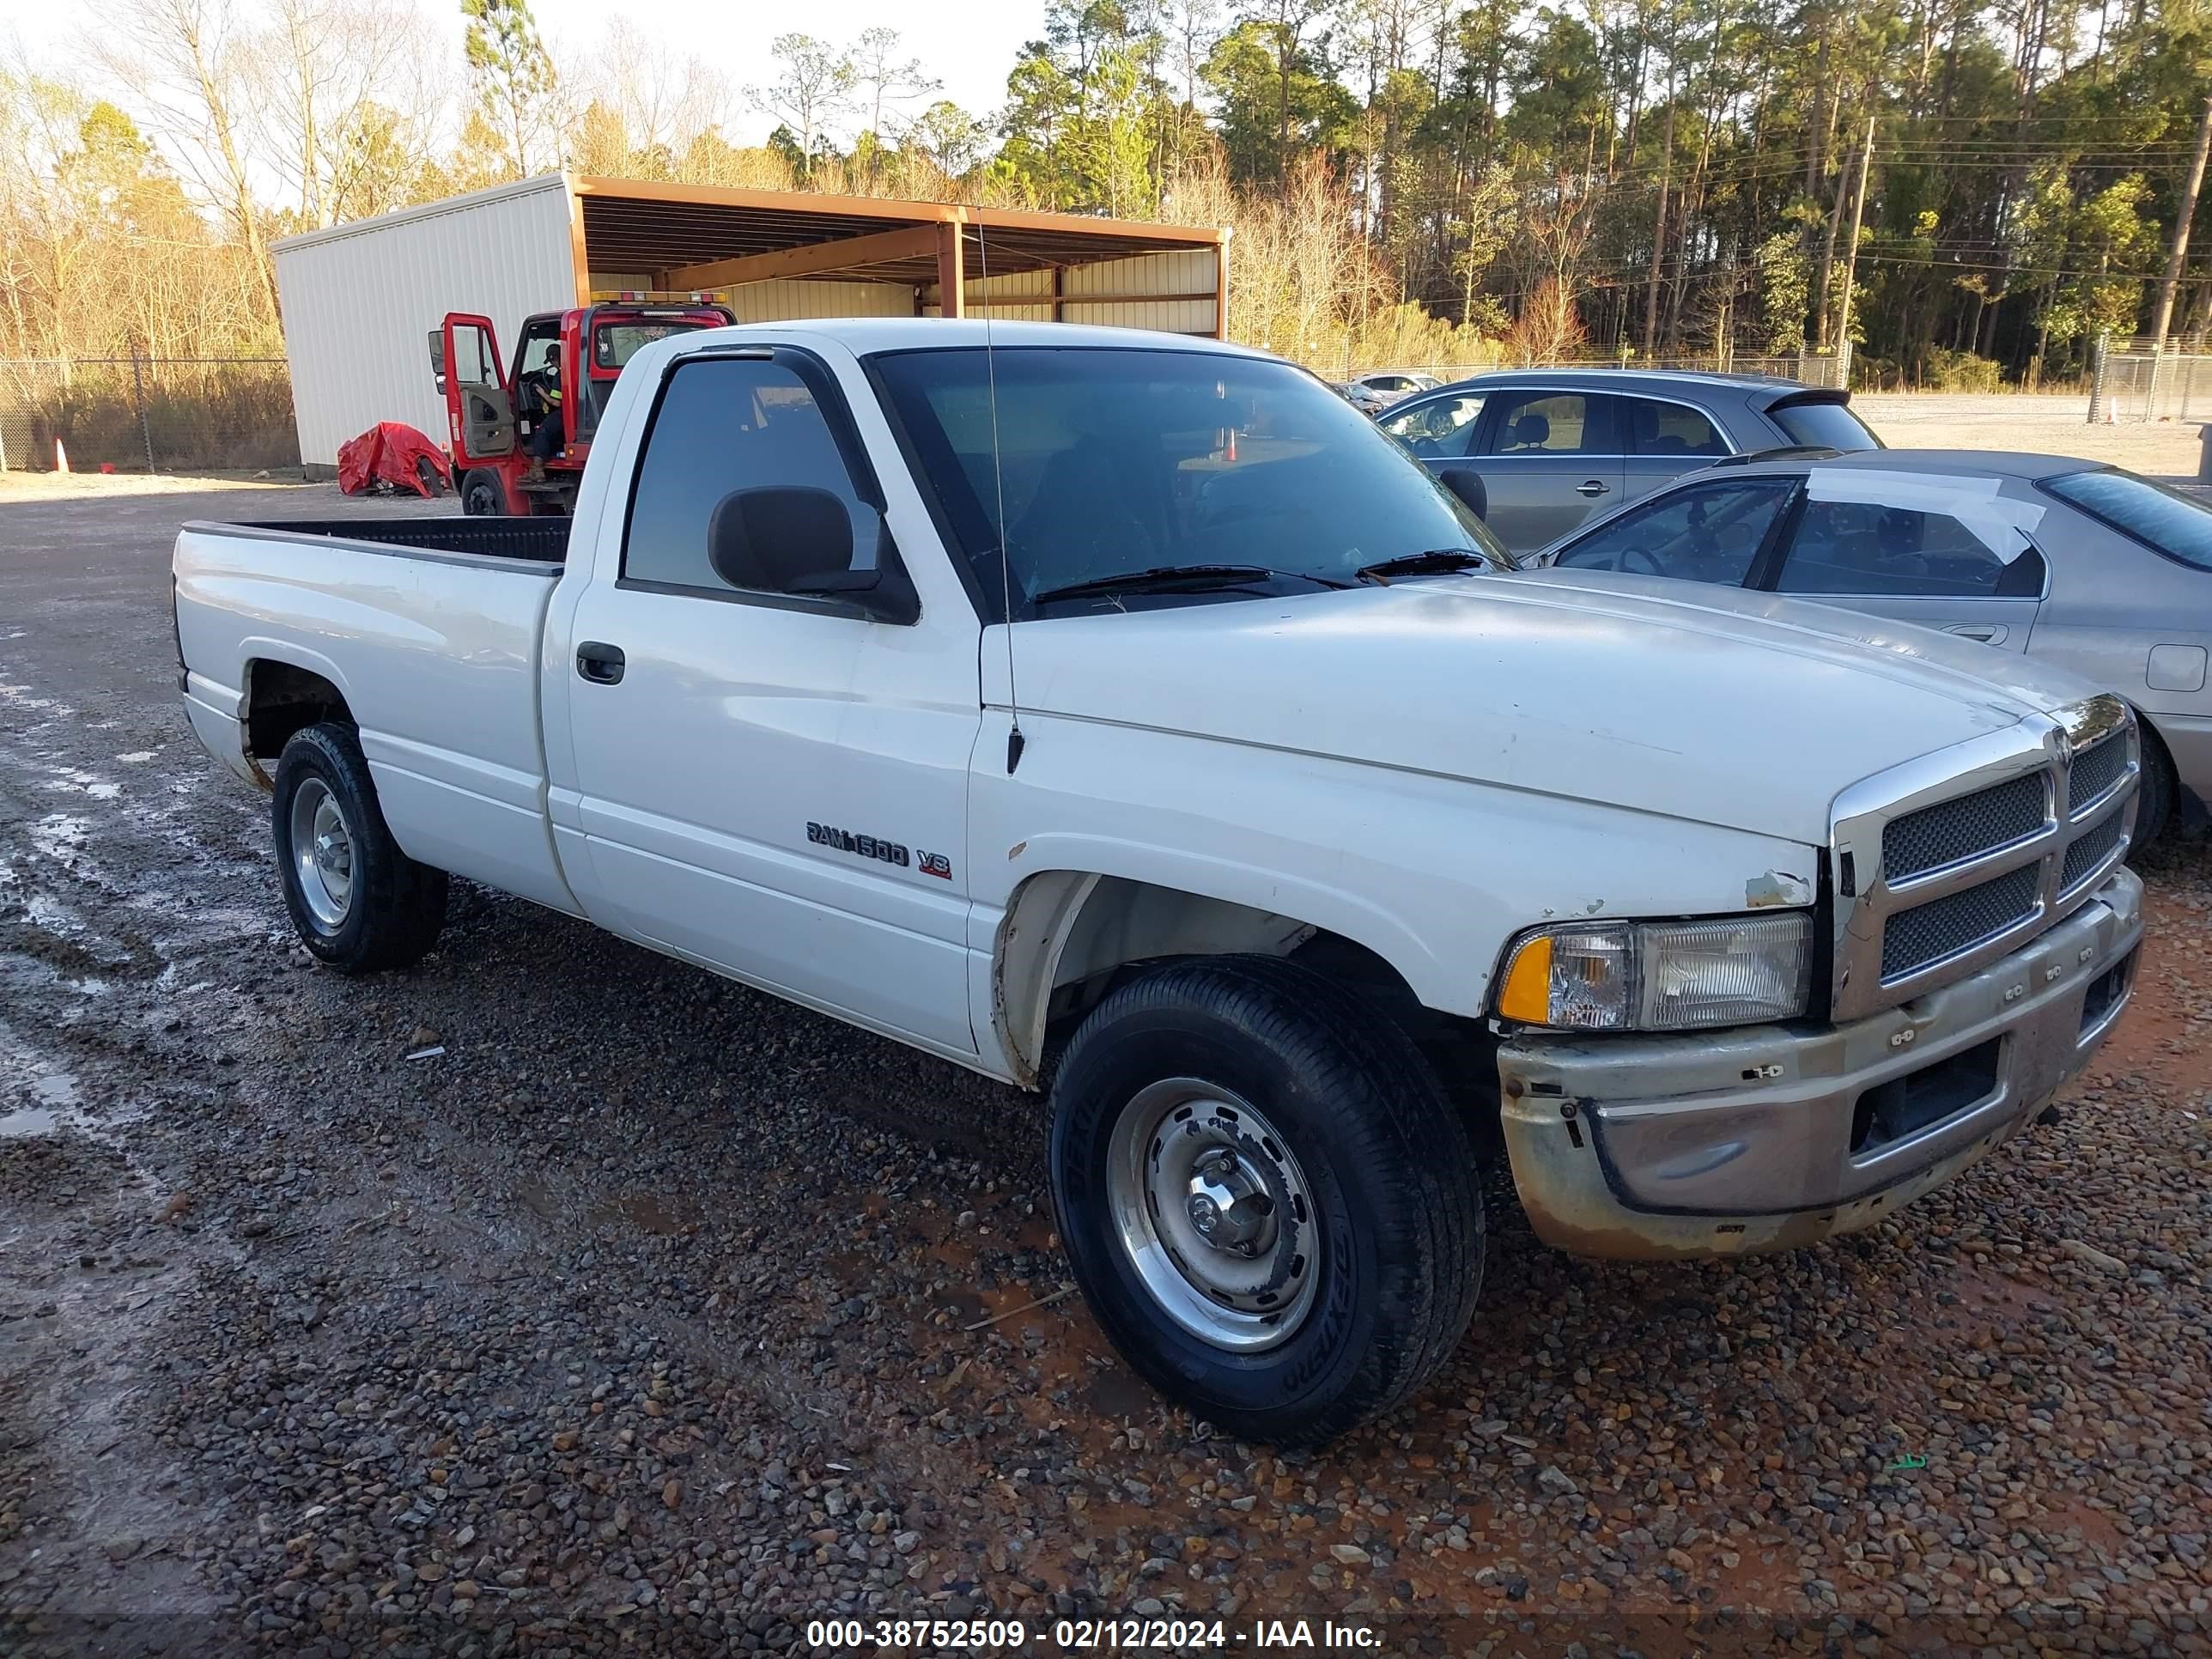 vin: 1B7HC16Y11S268378 1B7HC16Y11S268378 2001 dodge ram 5200 for Sale in 39562, 8209 Old Stage Rd, Moss Point, USA